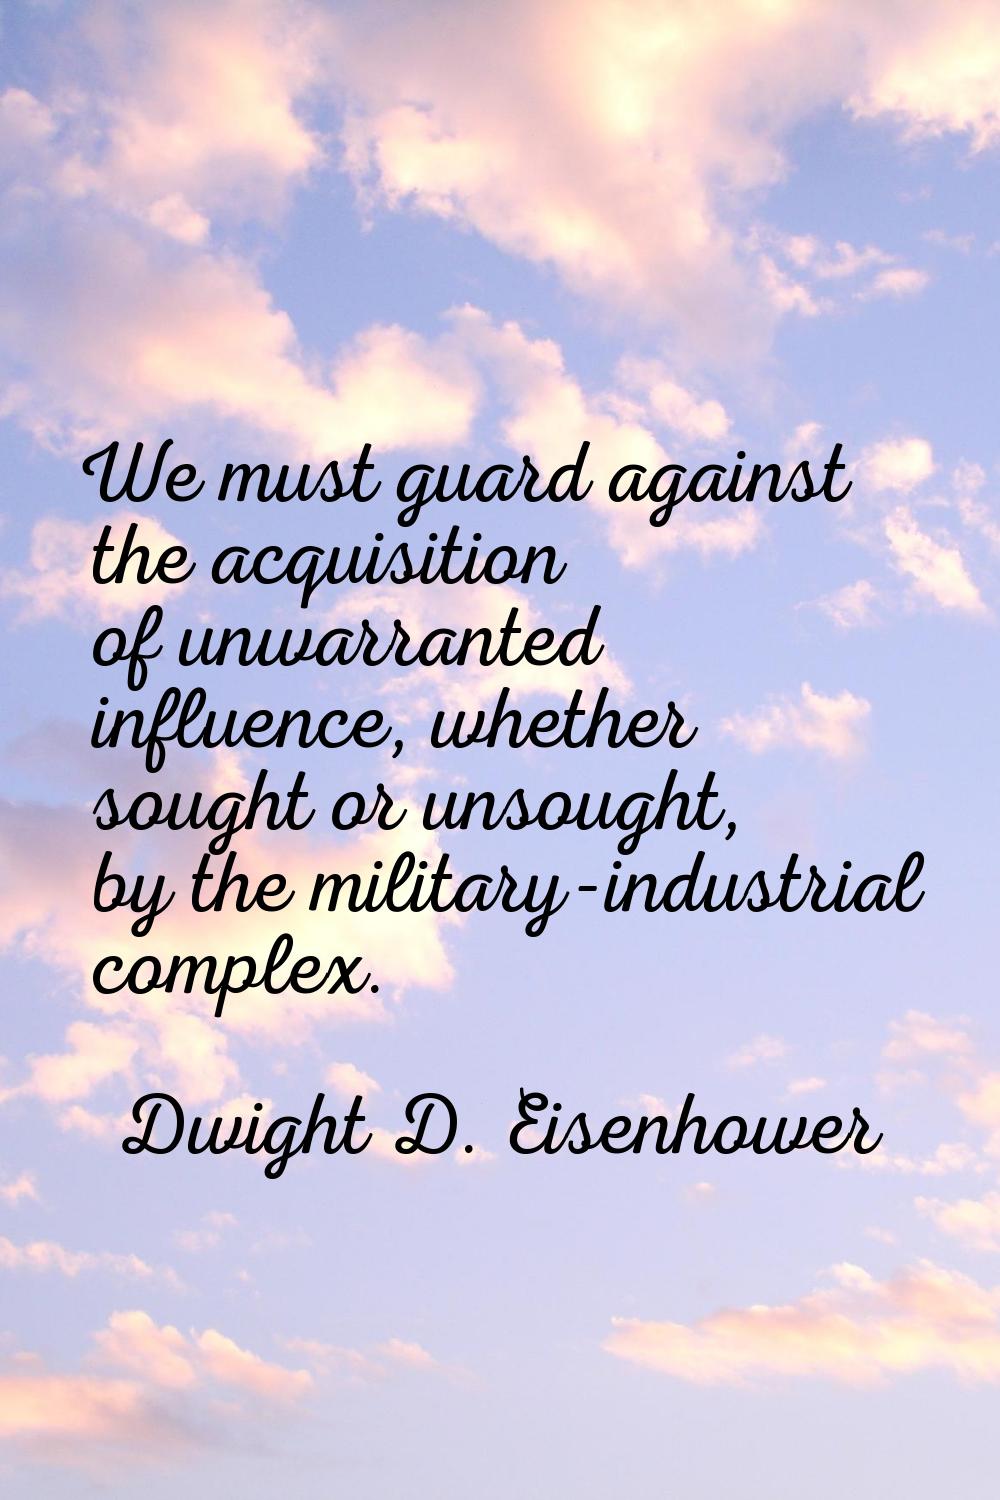 We must guard against the acquisition of unwarranted influence, whether sought or unsought, by the 